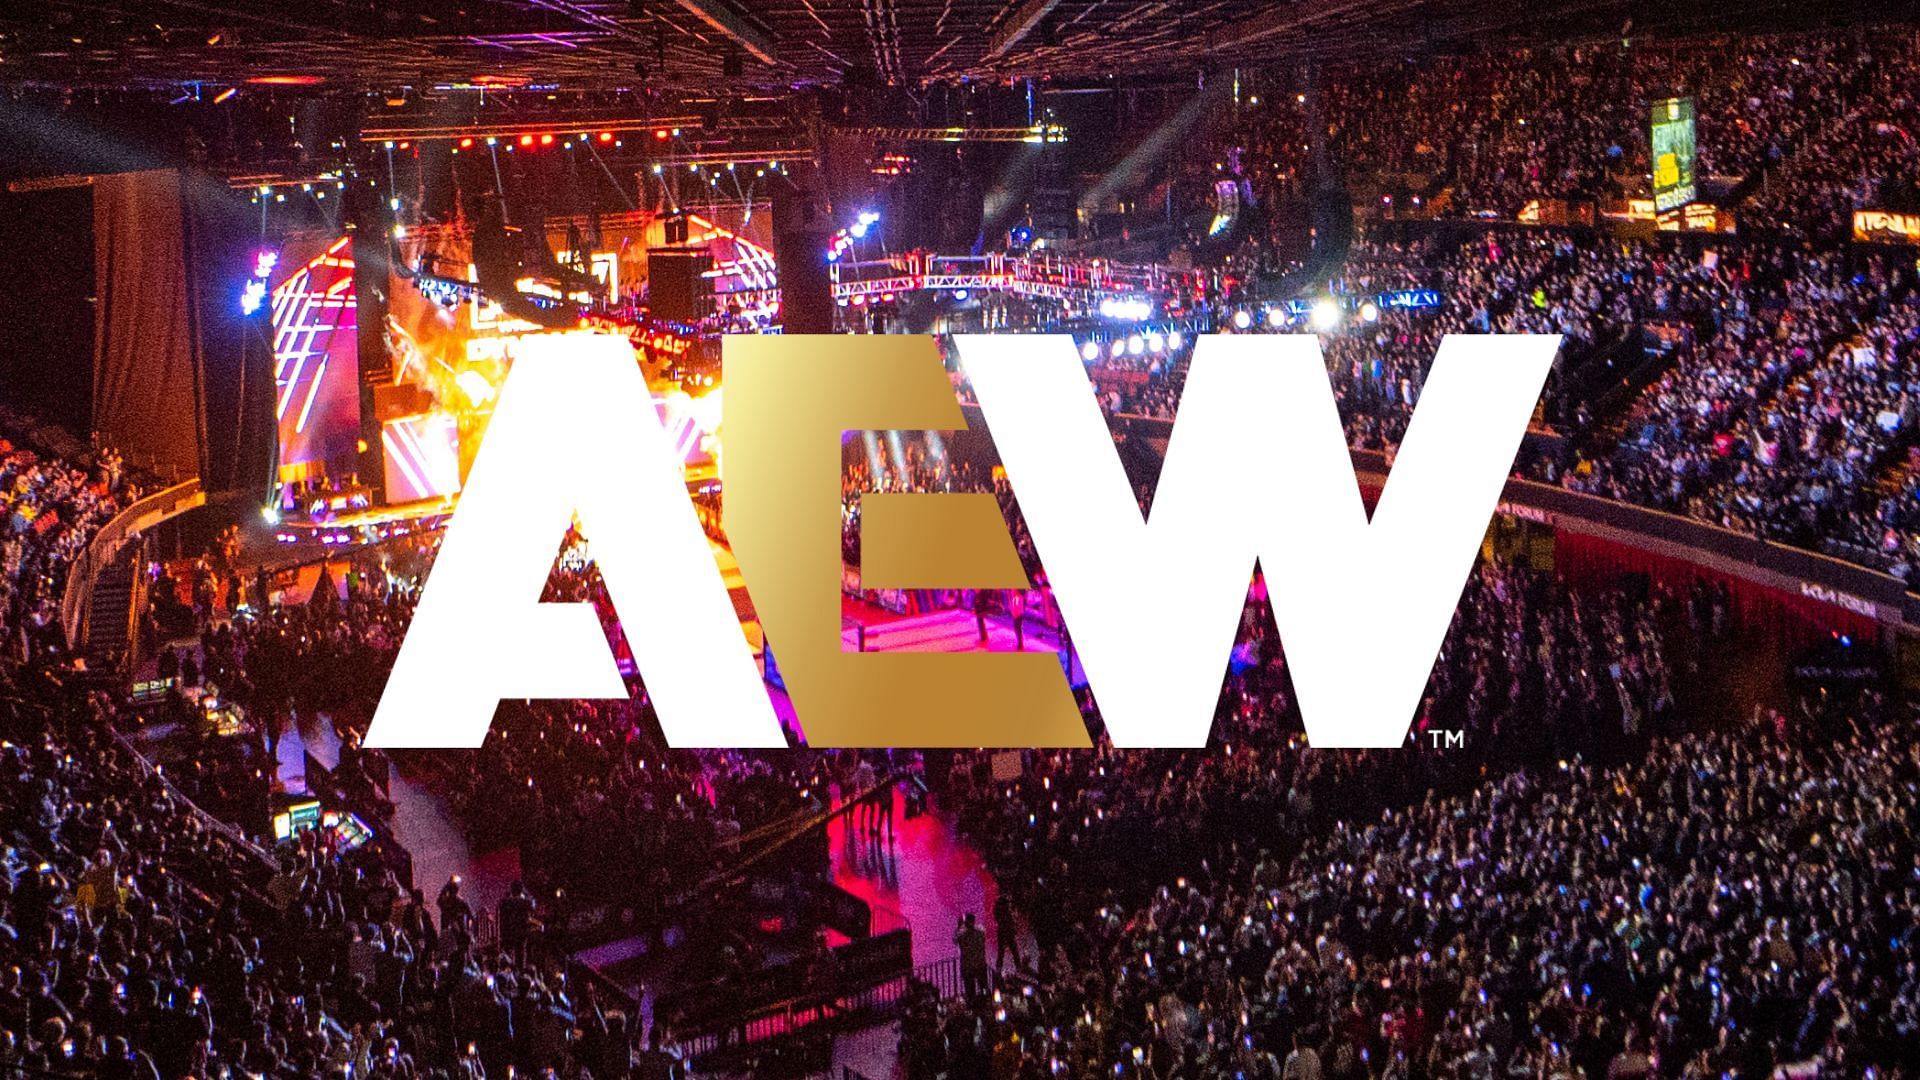 AEW was founded in 2019